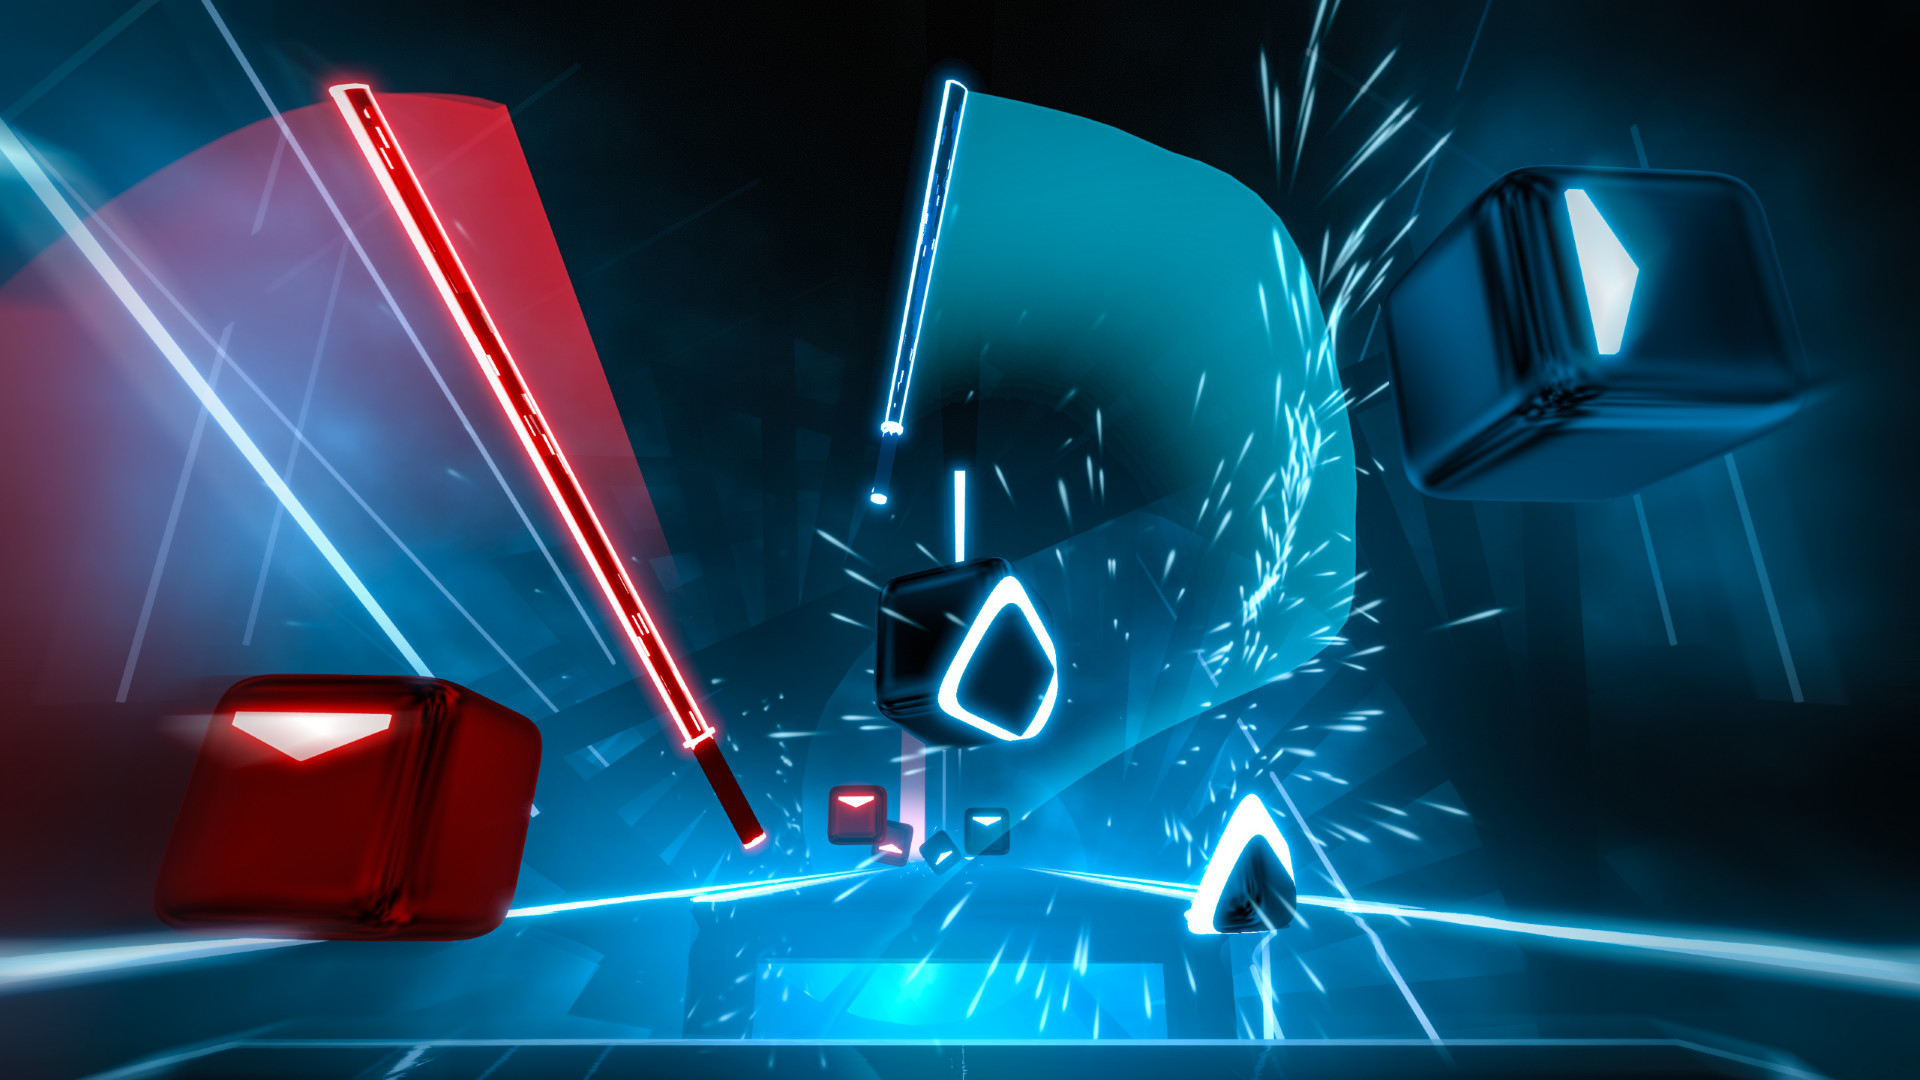 Find the best laptops for Beat Saber